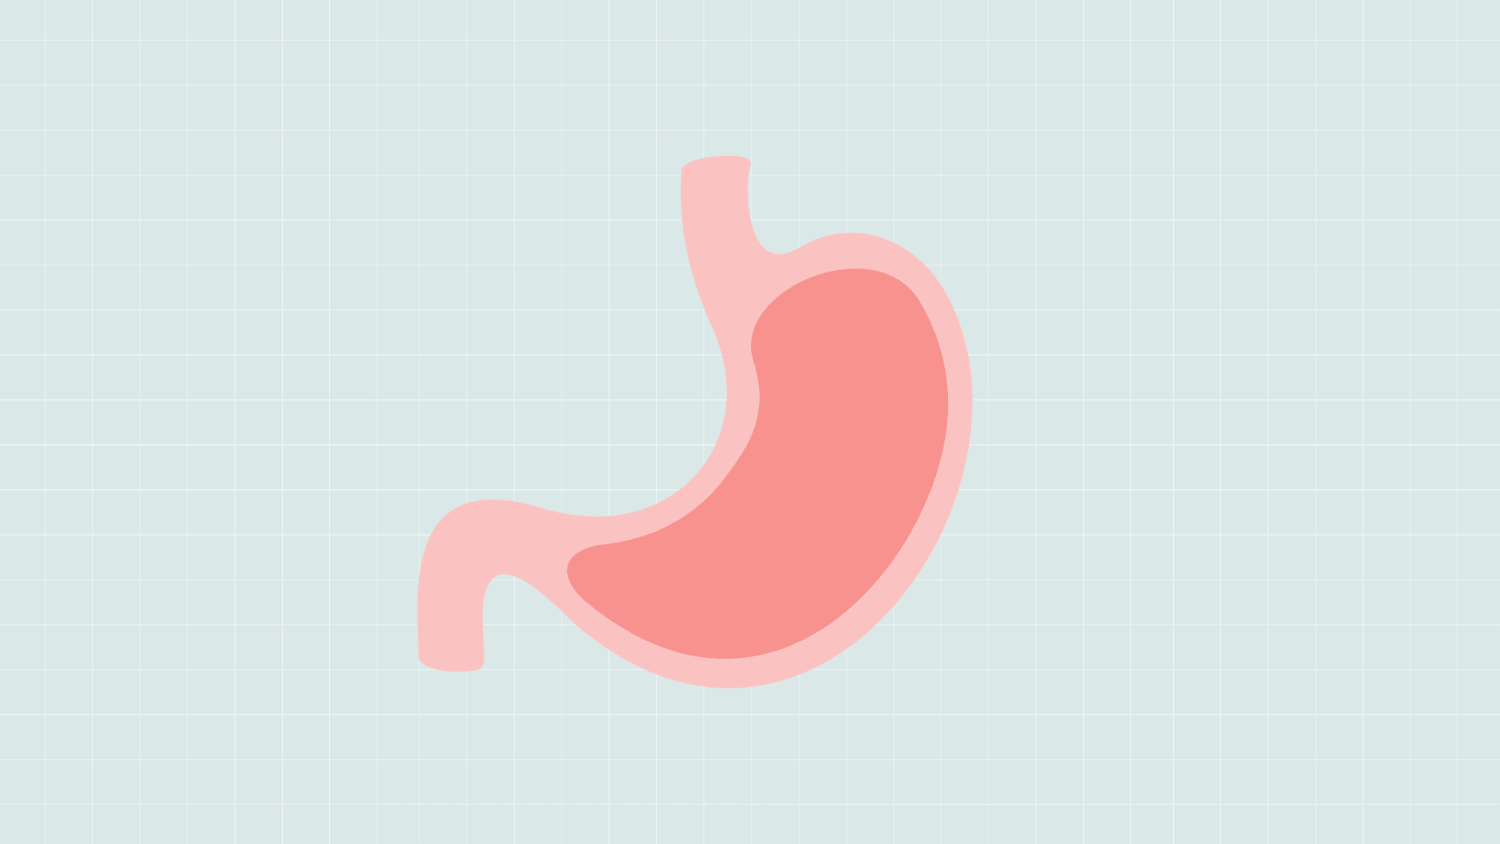 An animated illustration of a stomach filling up with food